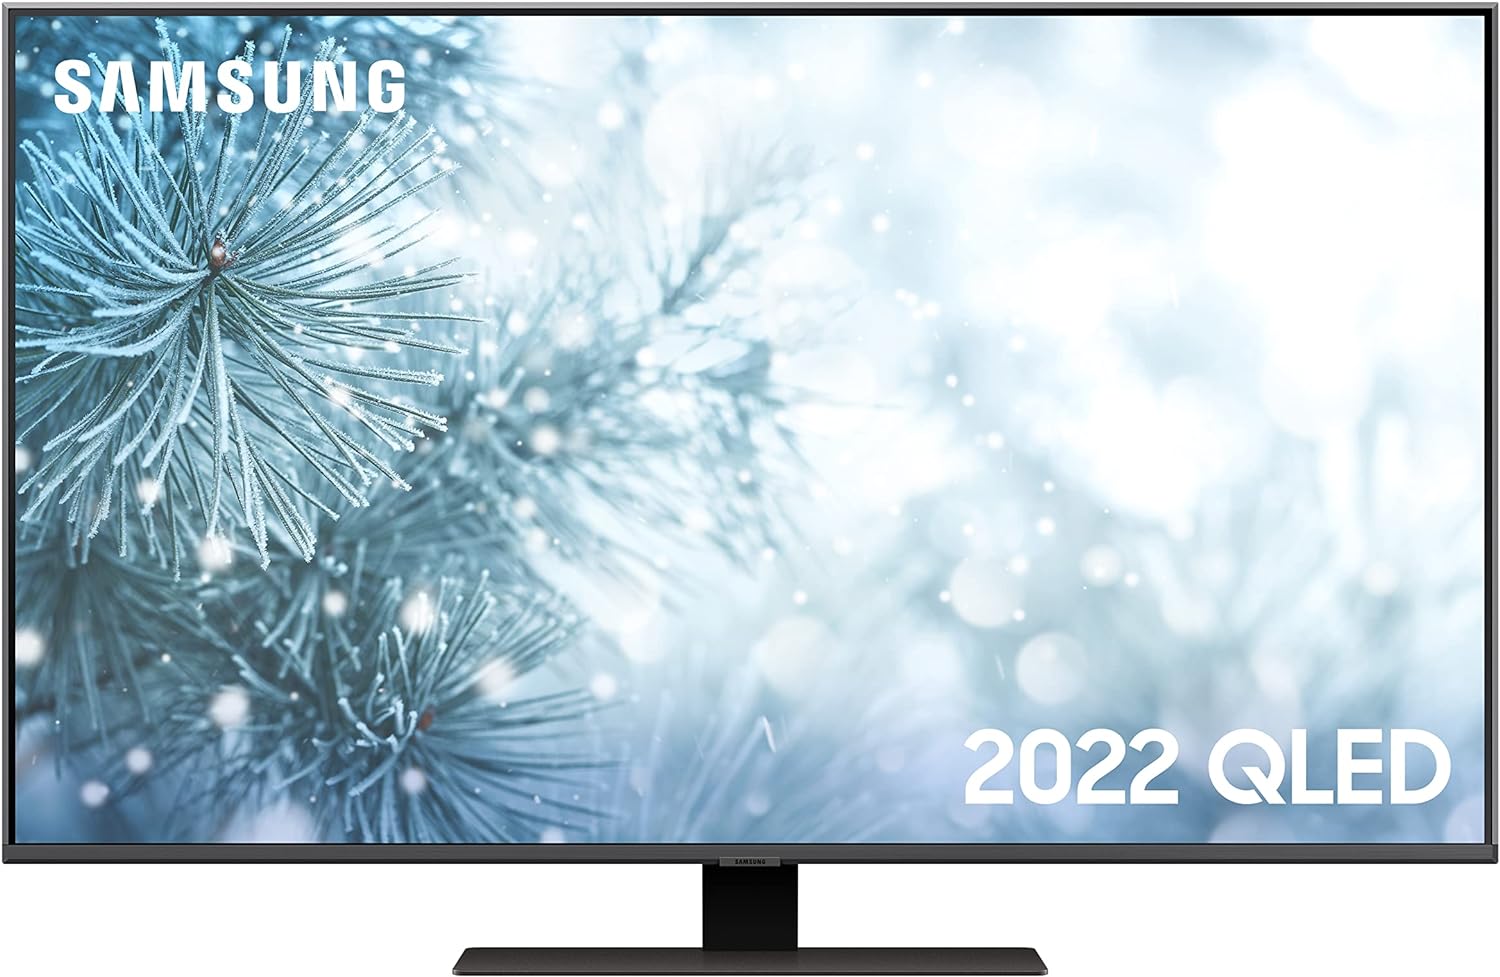 Samsung 55 Inch Q80C 4K QLED HDR Smart TV (2023) - Neural Quantum 4K Processor With Direct Full Array Mini LEDs, Dolby Atmos Audio, Quantum HDR & Quantum Dot Colour Technology, With Alexa & AI Sound - Amazing Gadgets Outlet